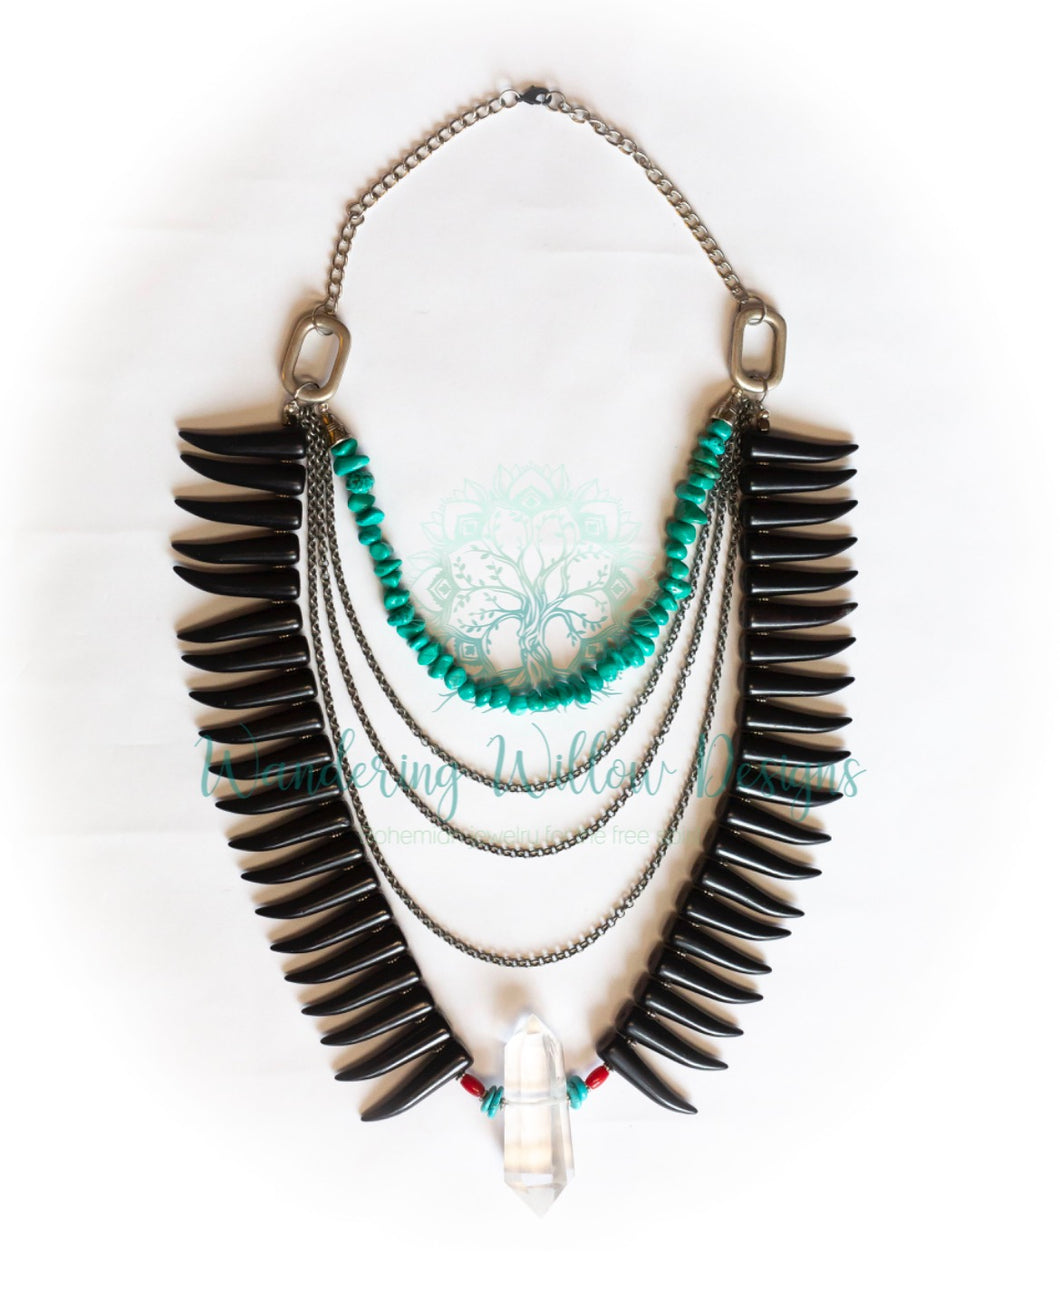 The Kali Necklace